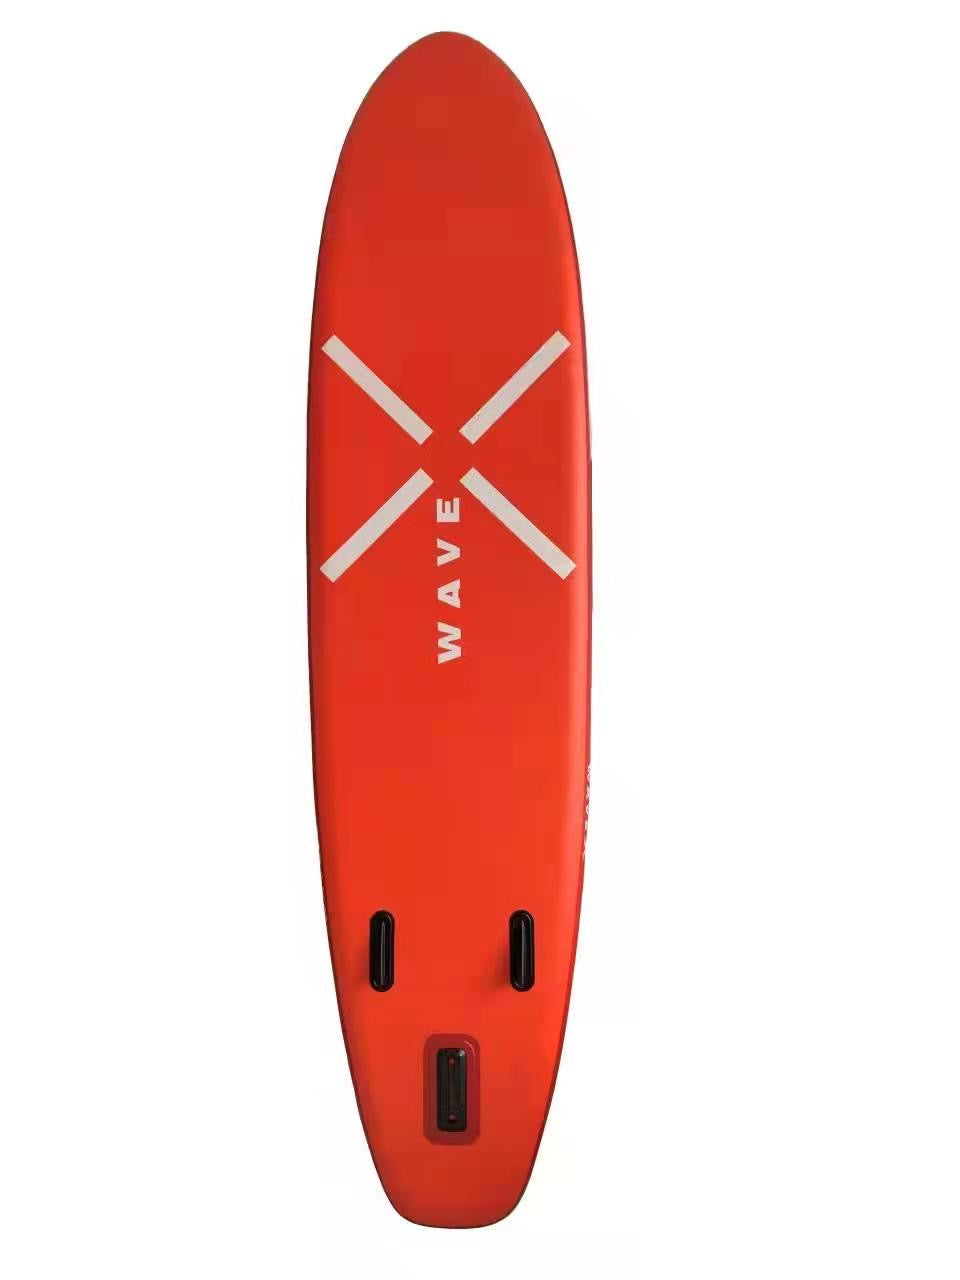 MODEL-X / 11'6" WAVEX TOURING INFLATABLE STANDUP PADDLE